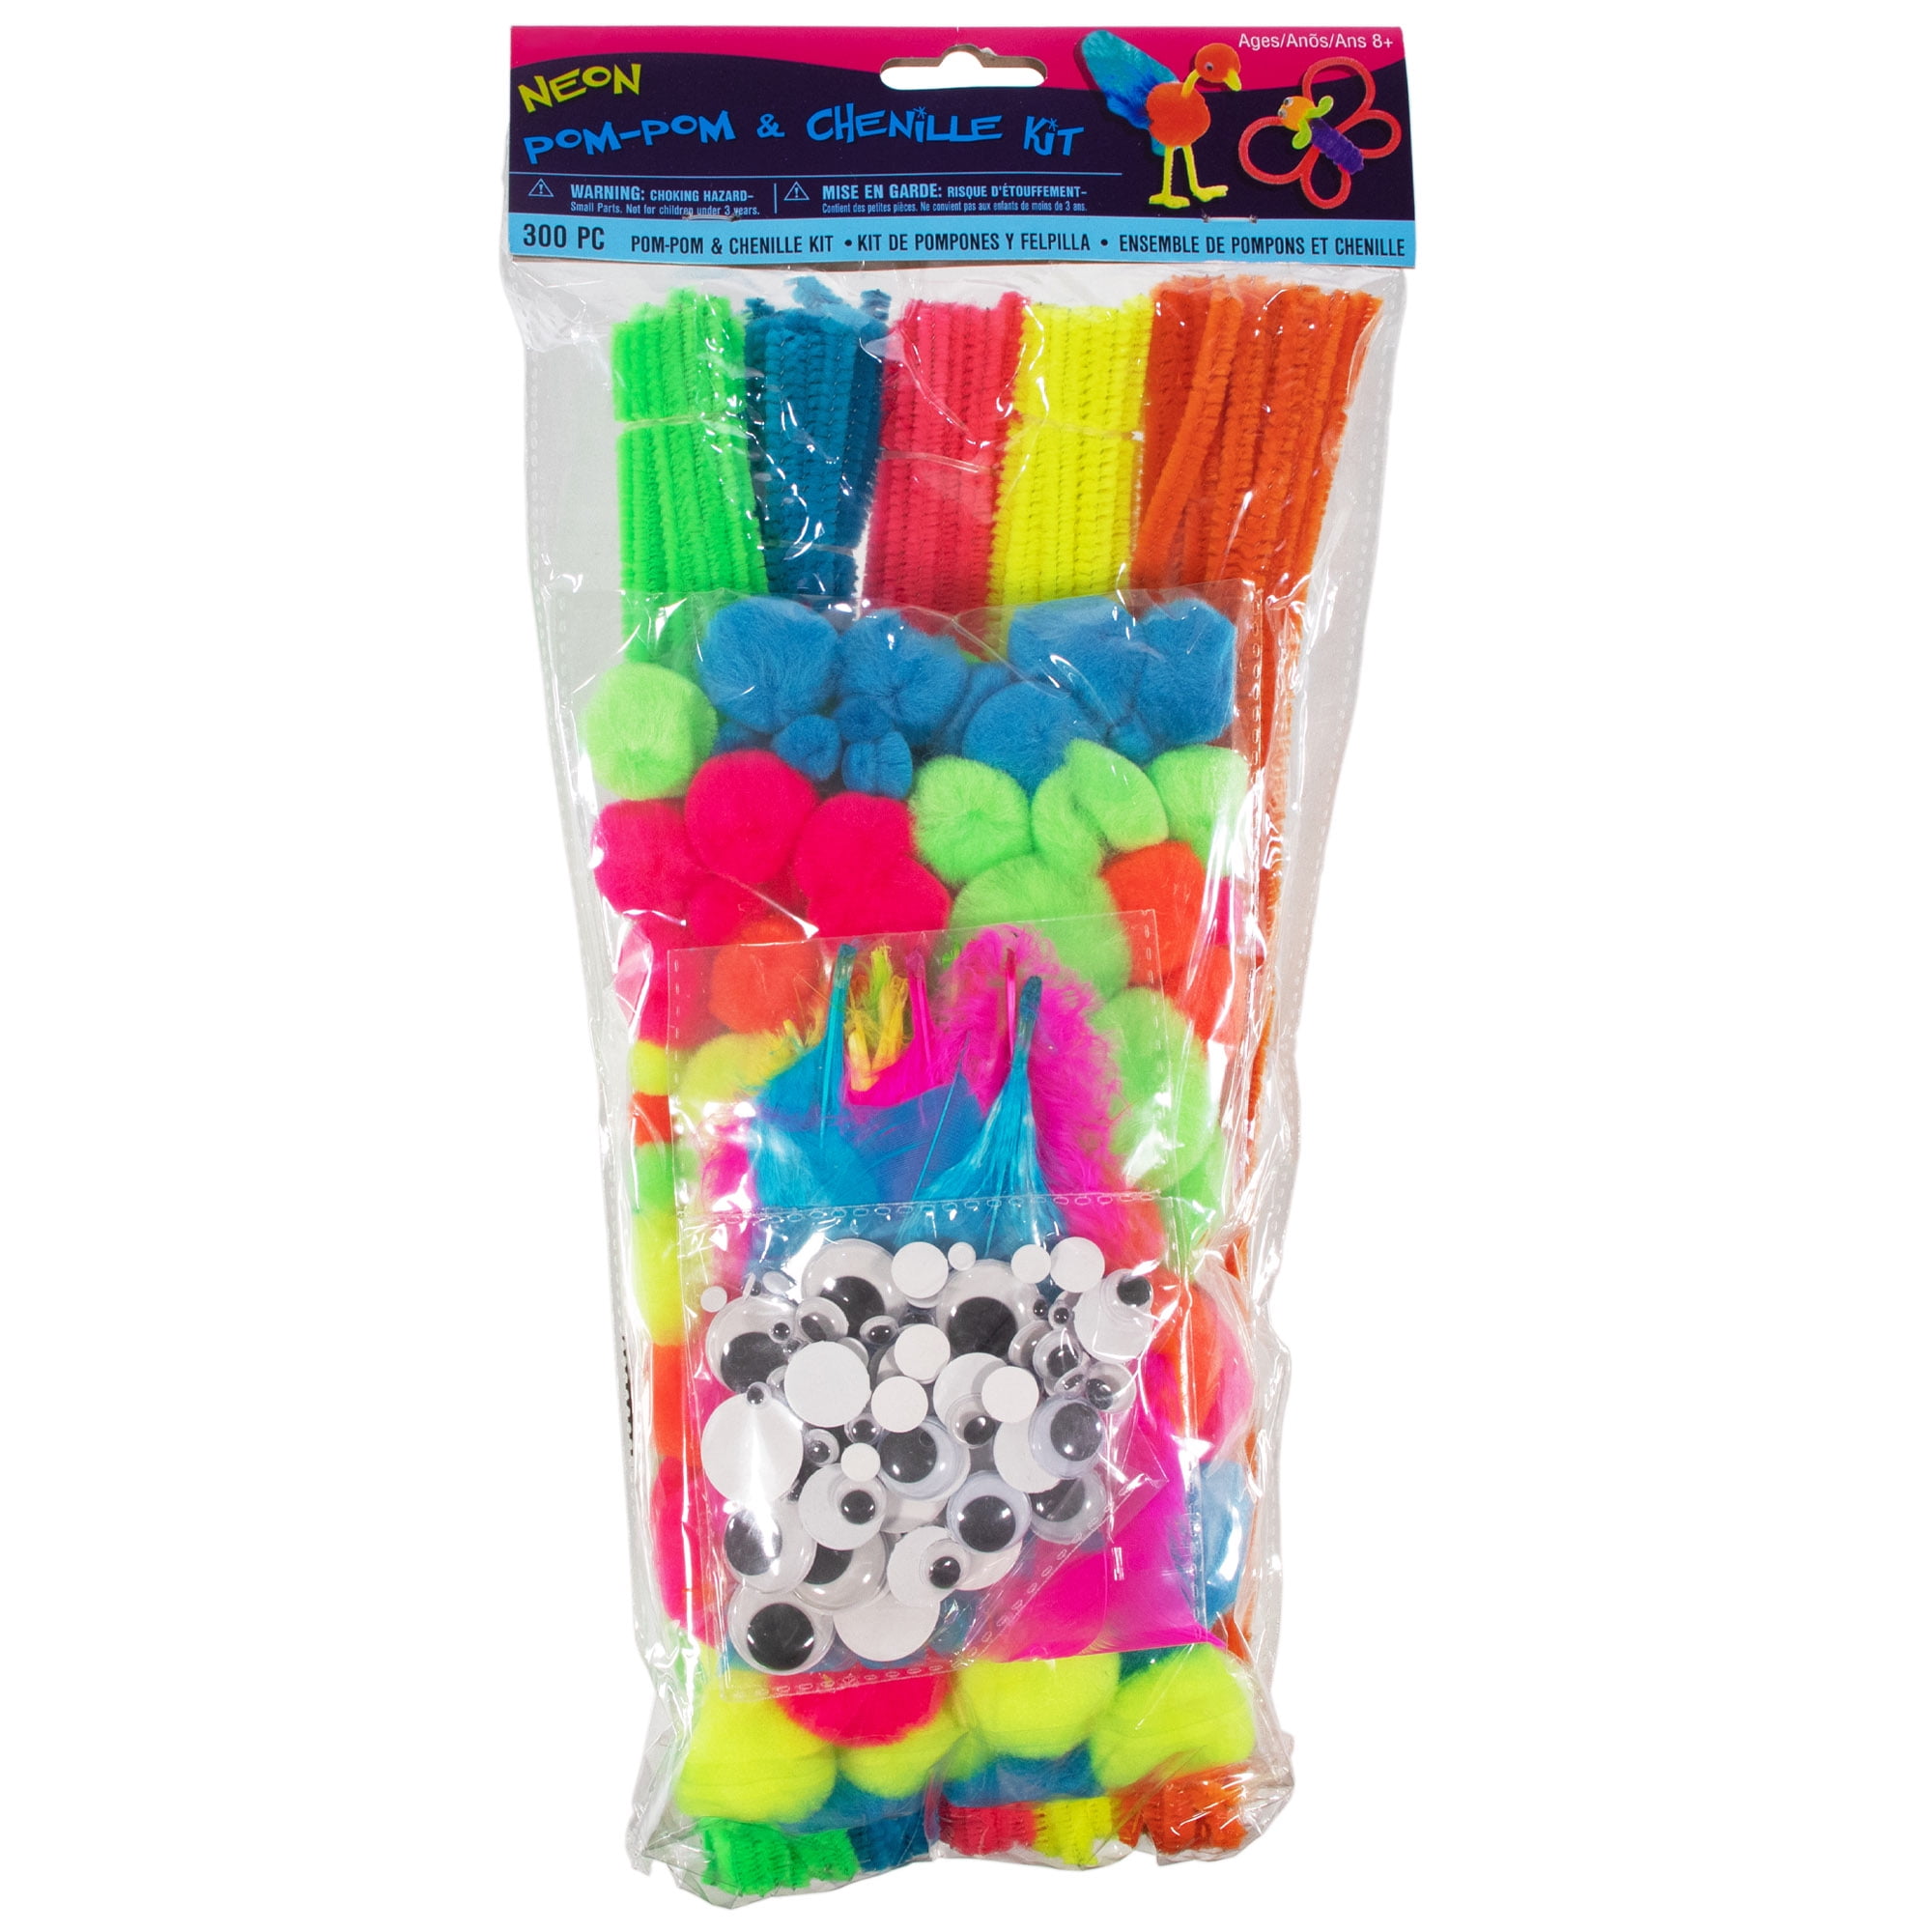 Chenille Stems (pipe cleaners) - S&S Wholesale